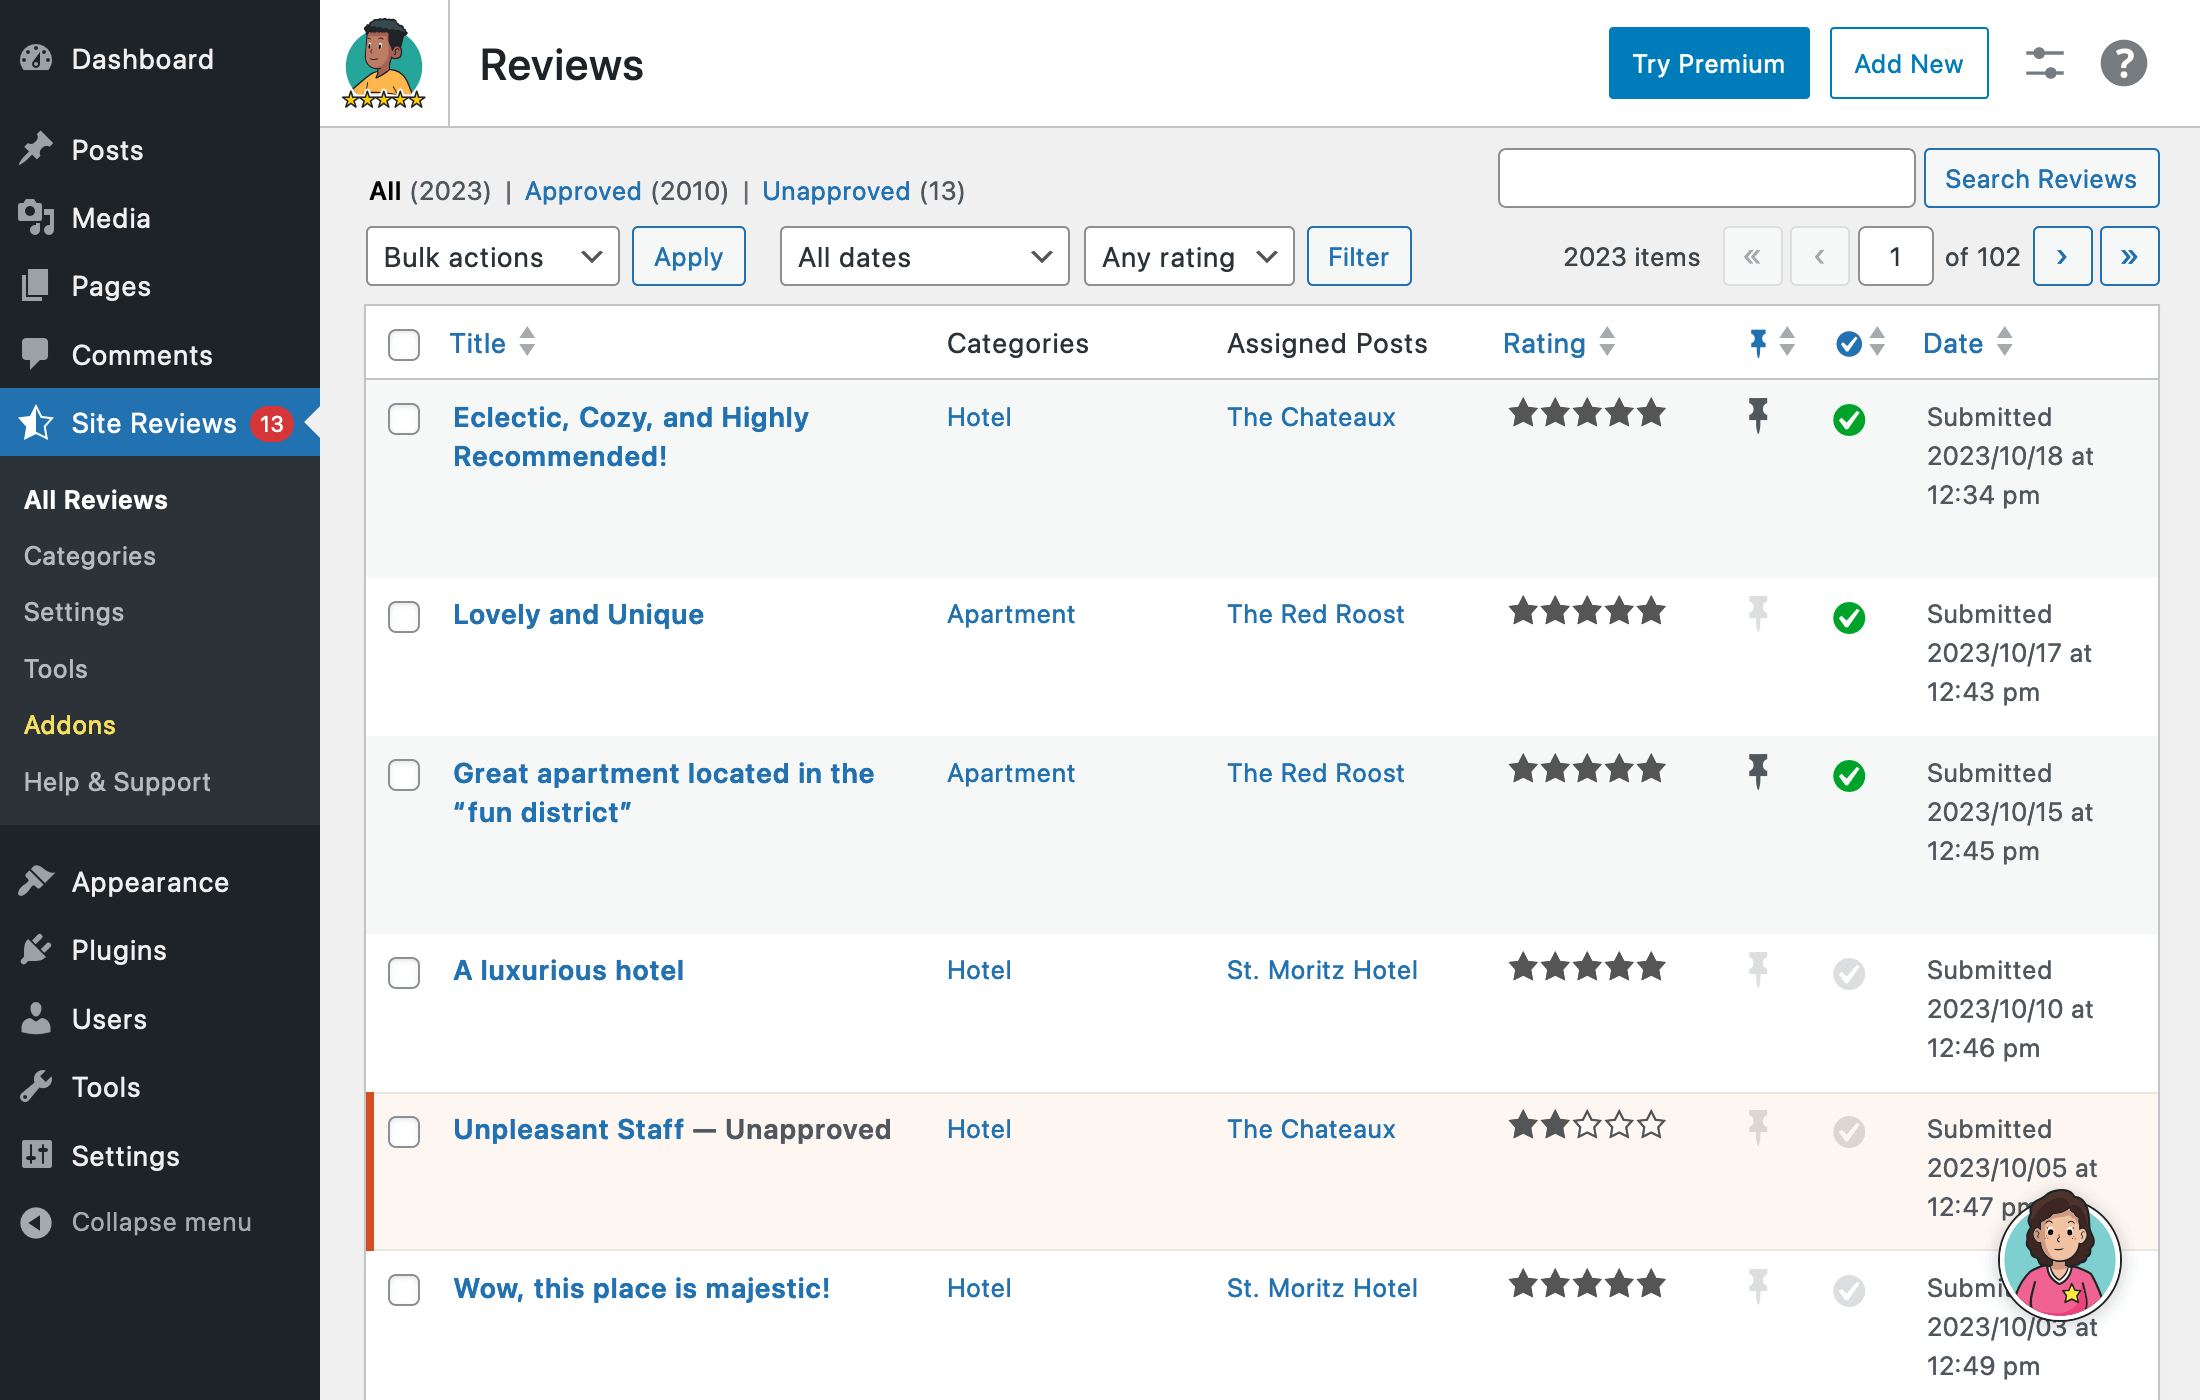 The "All Reviews" page.